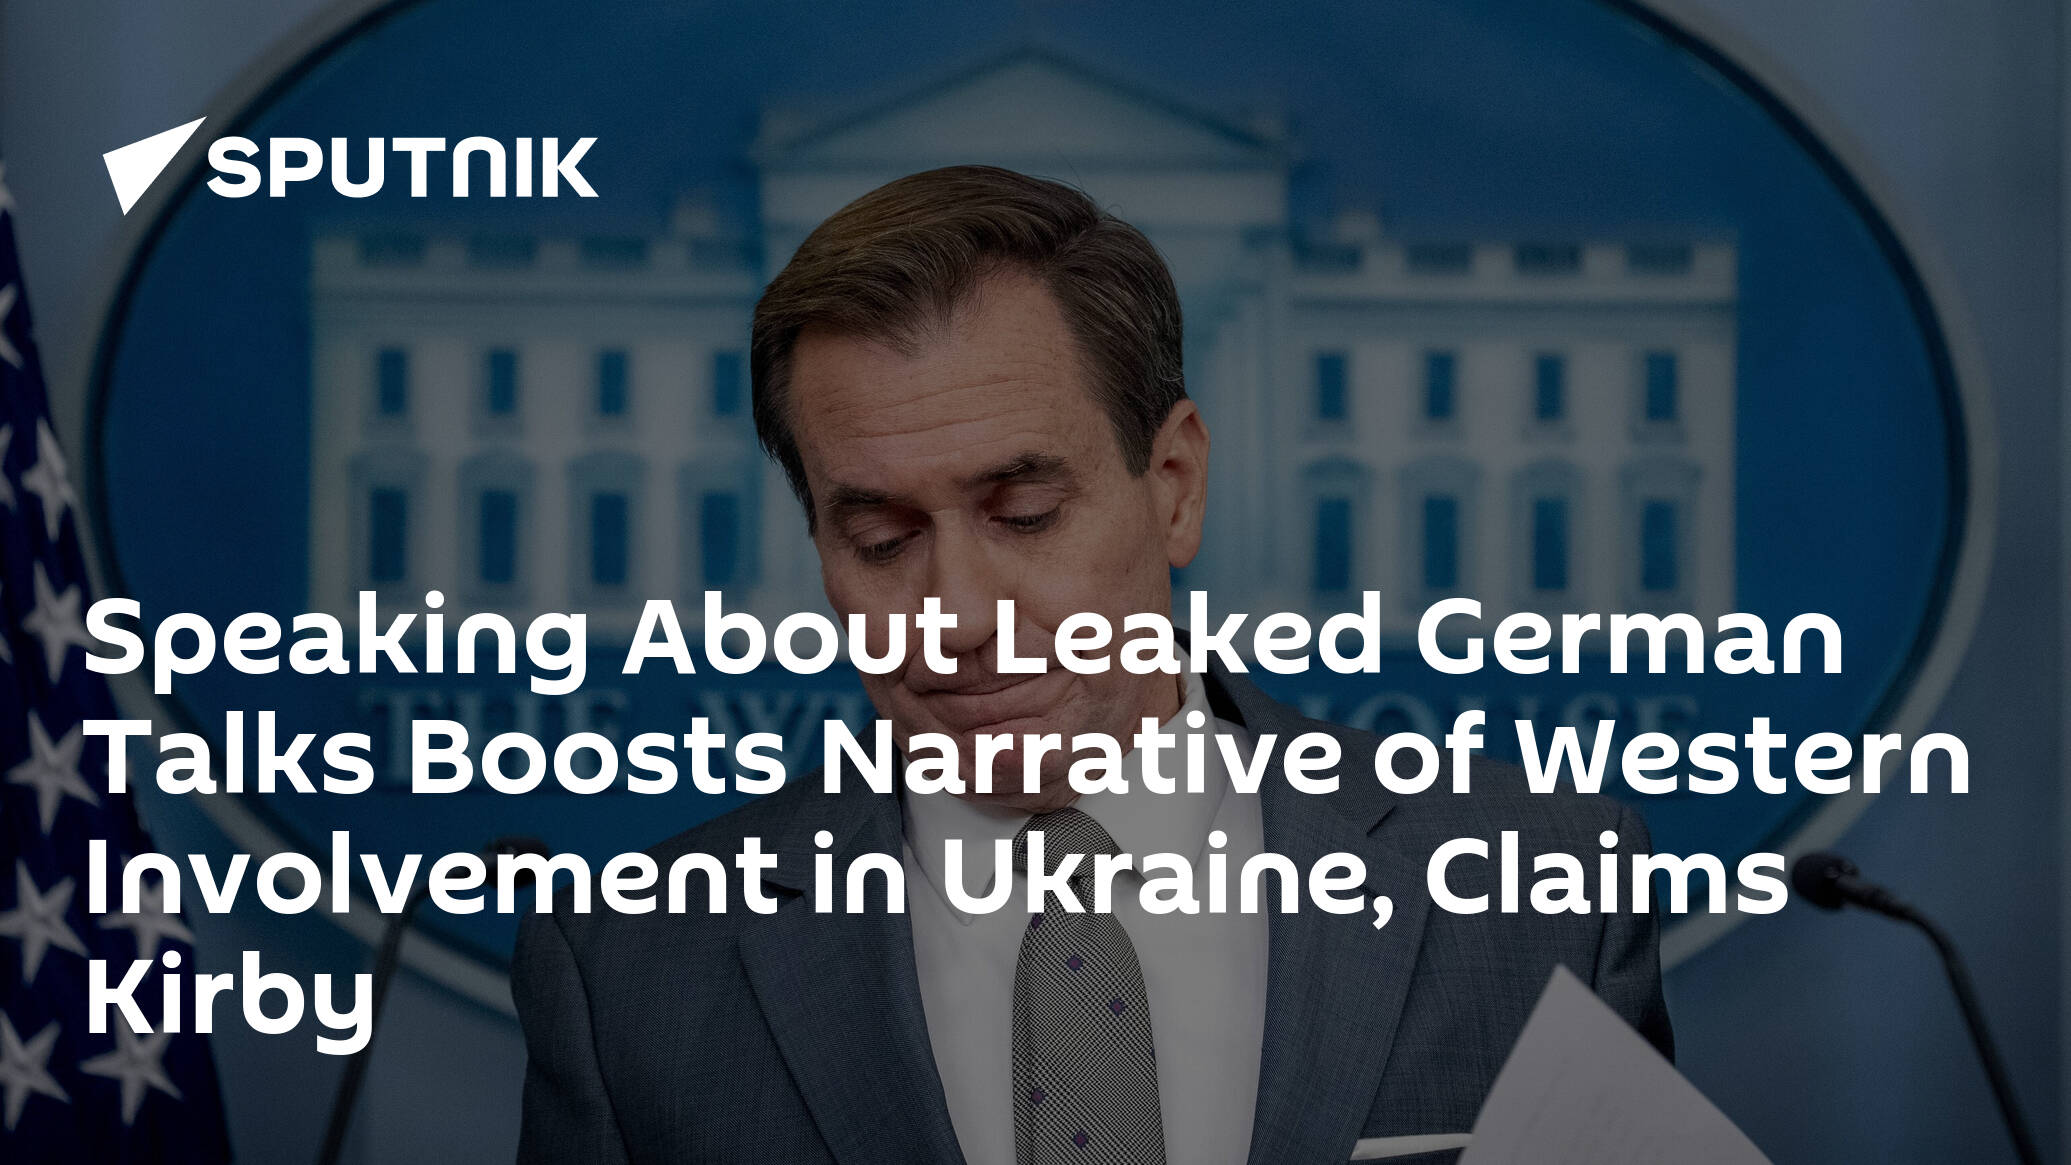 Speaking About Leaked German Talks Boosts Narrative of Western Involvement in Ukraine, Claims Kirby